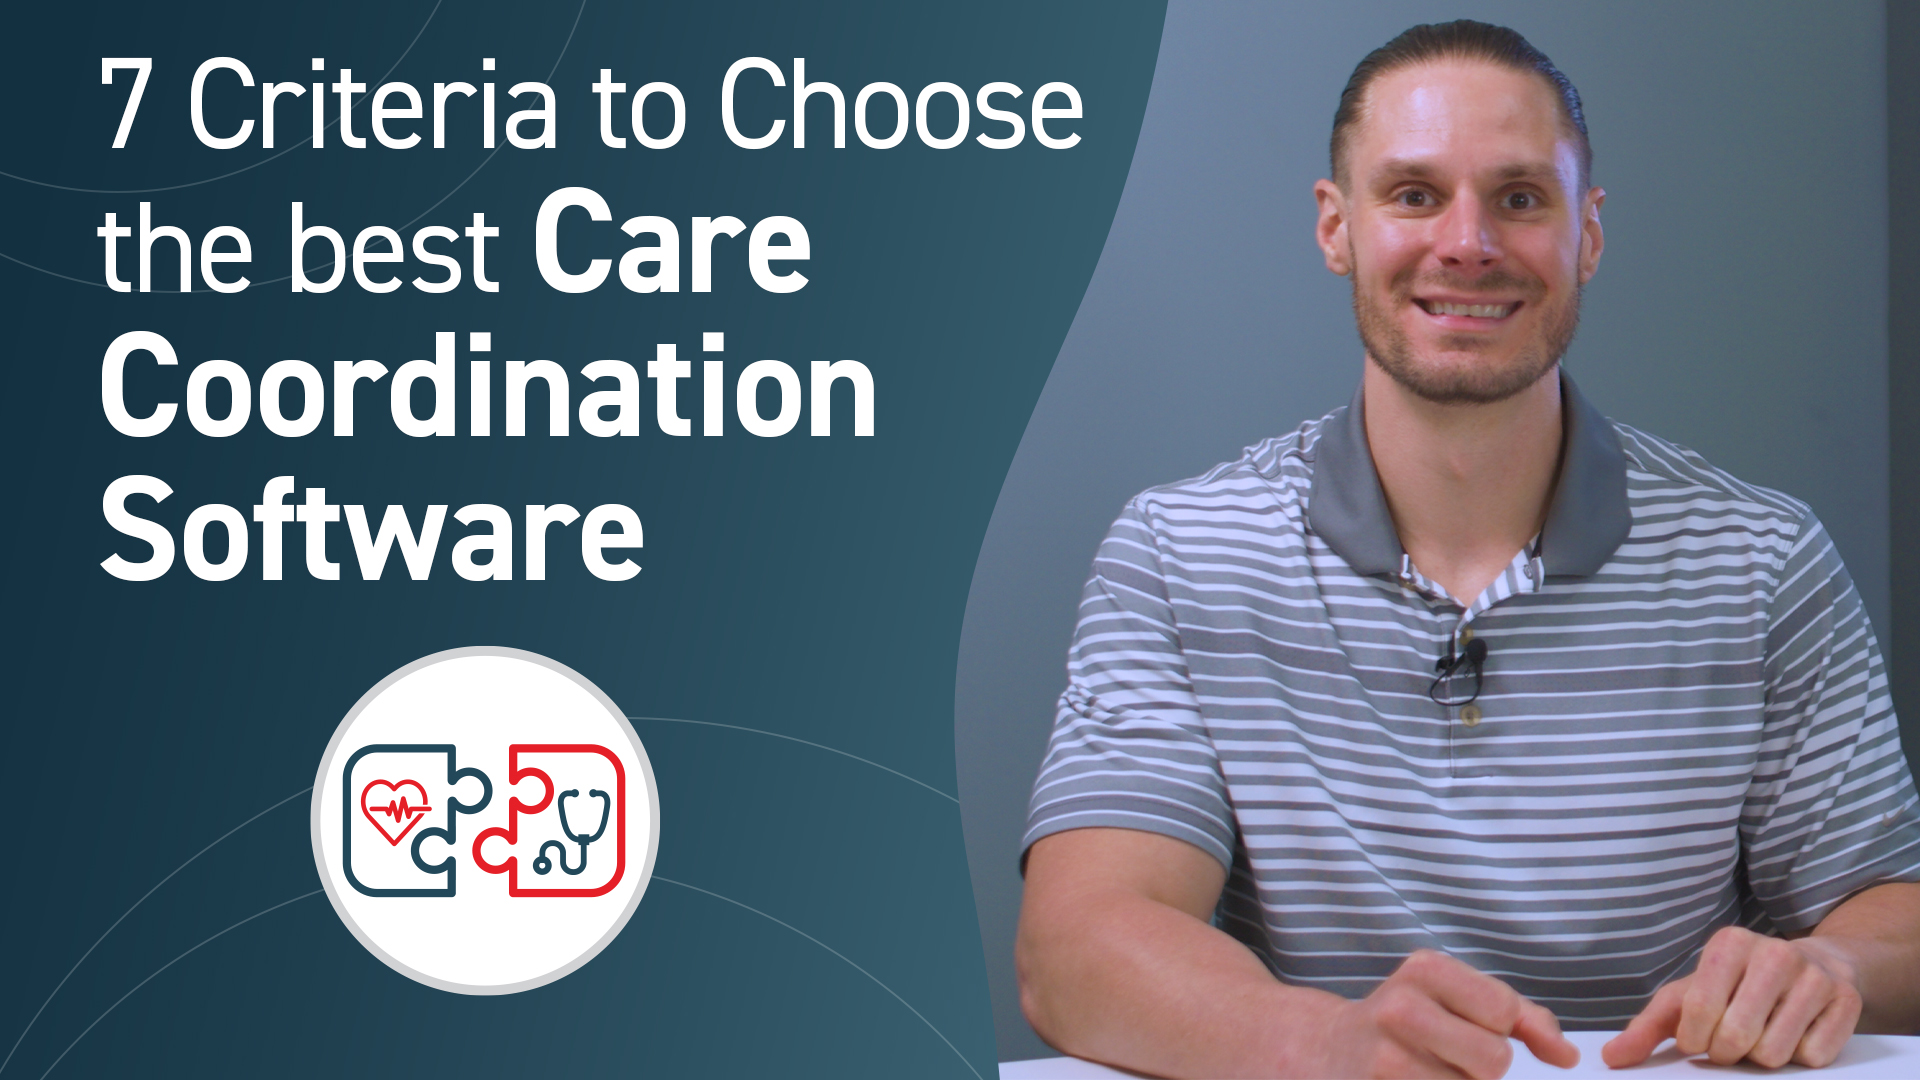 7 Criteria to Help You Choose the Best Care Coordination Software